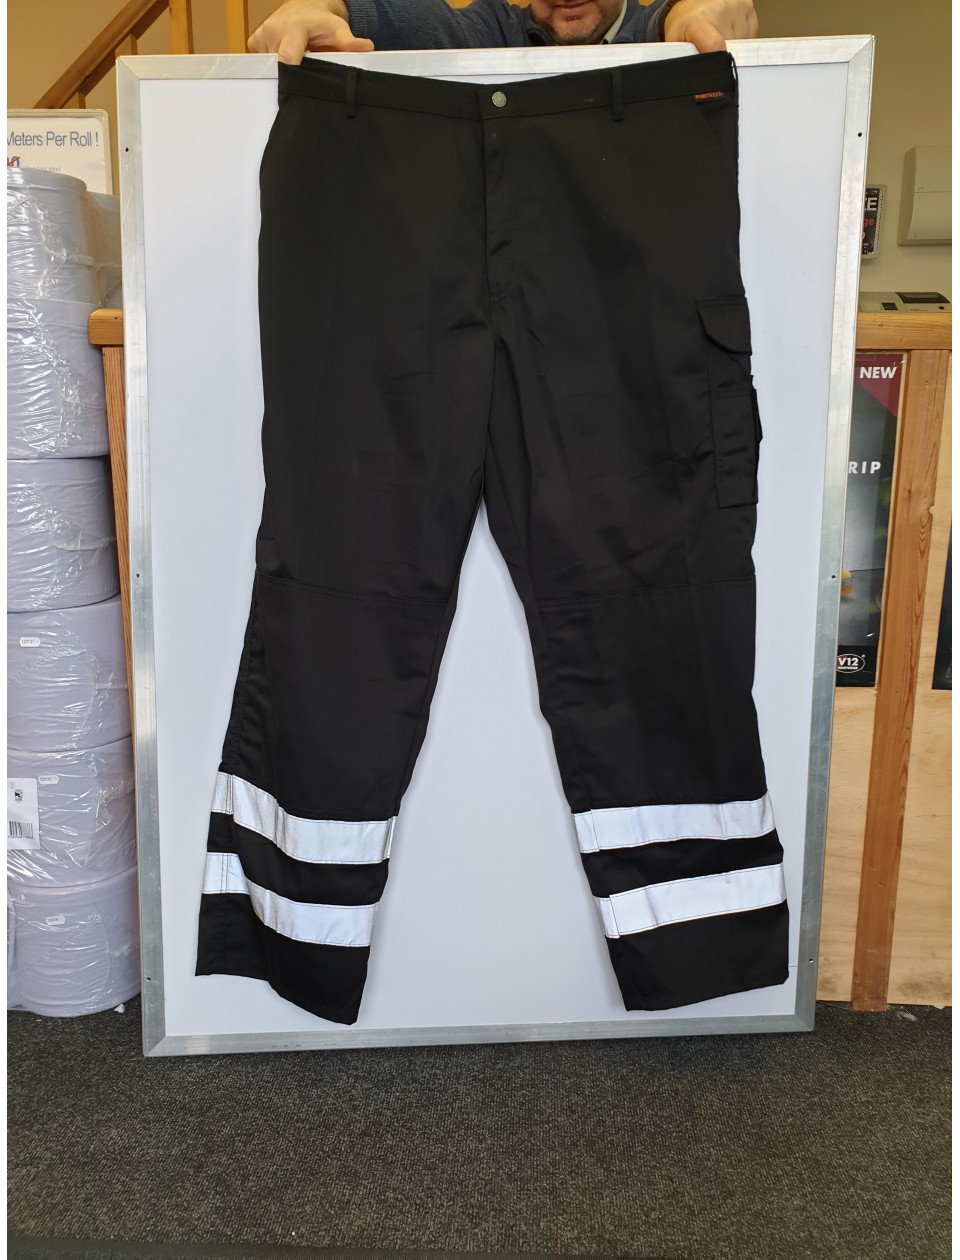 Portwest Iona Safety Combat Trousers S917